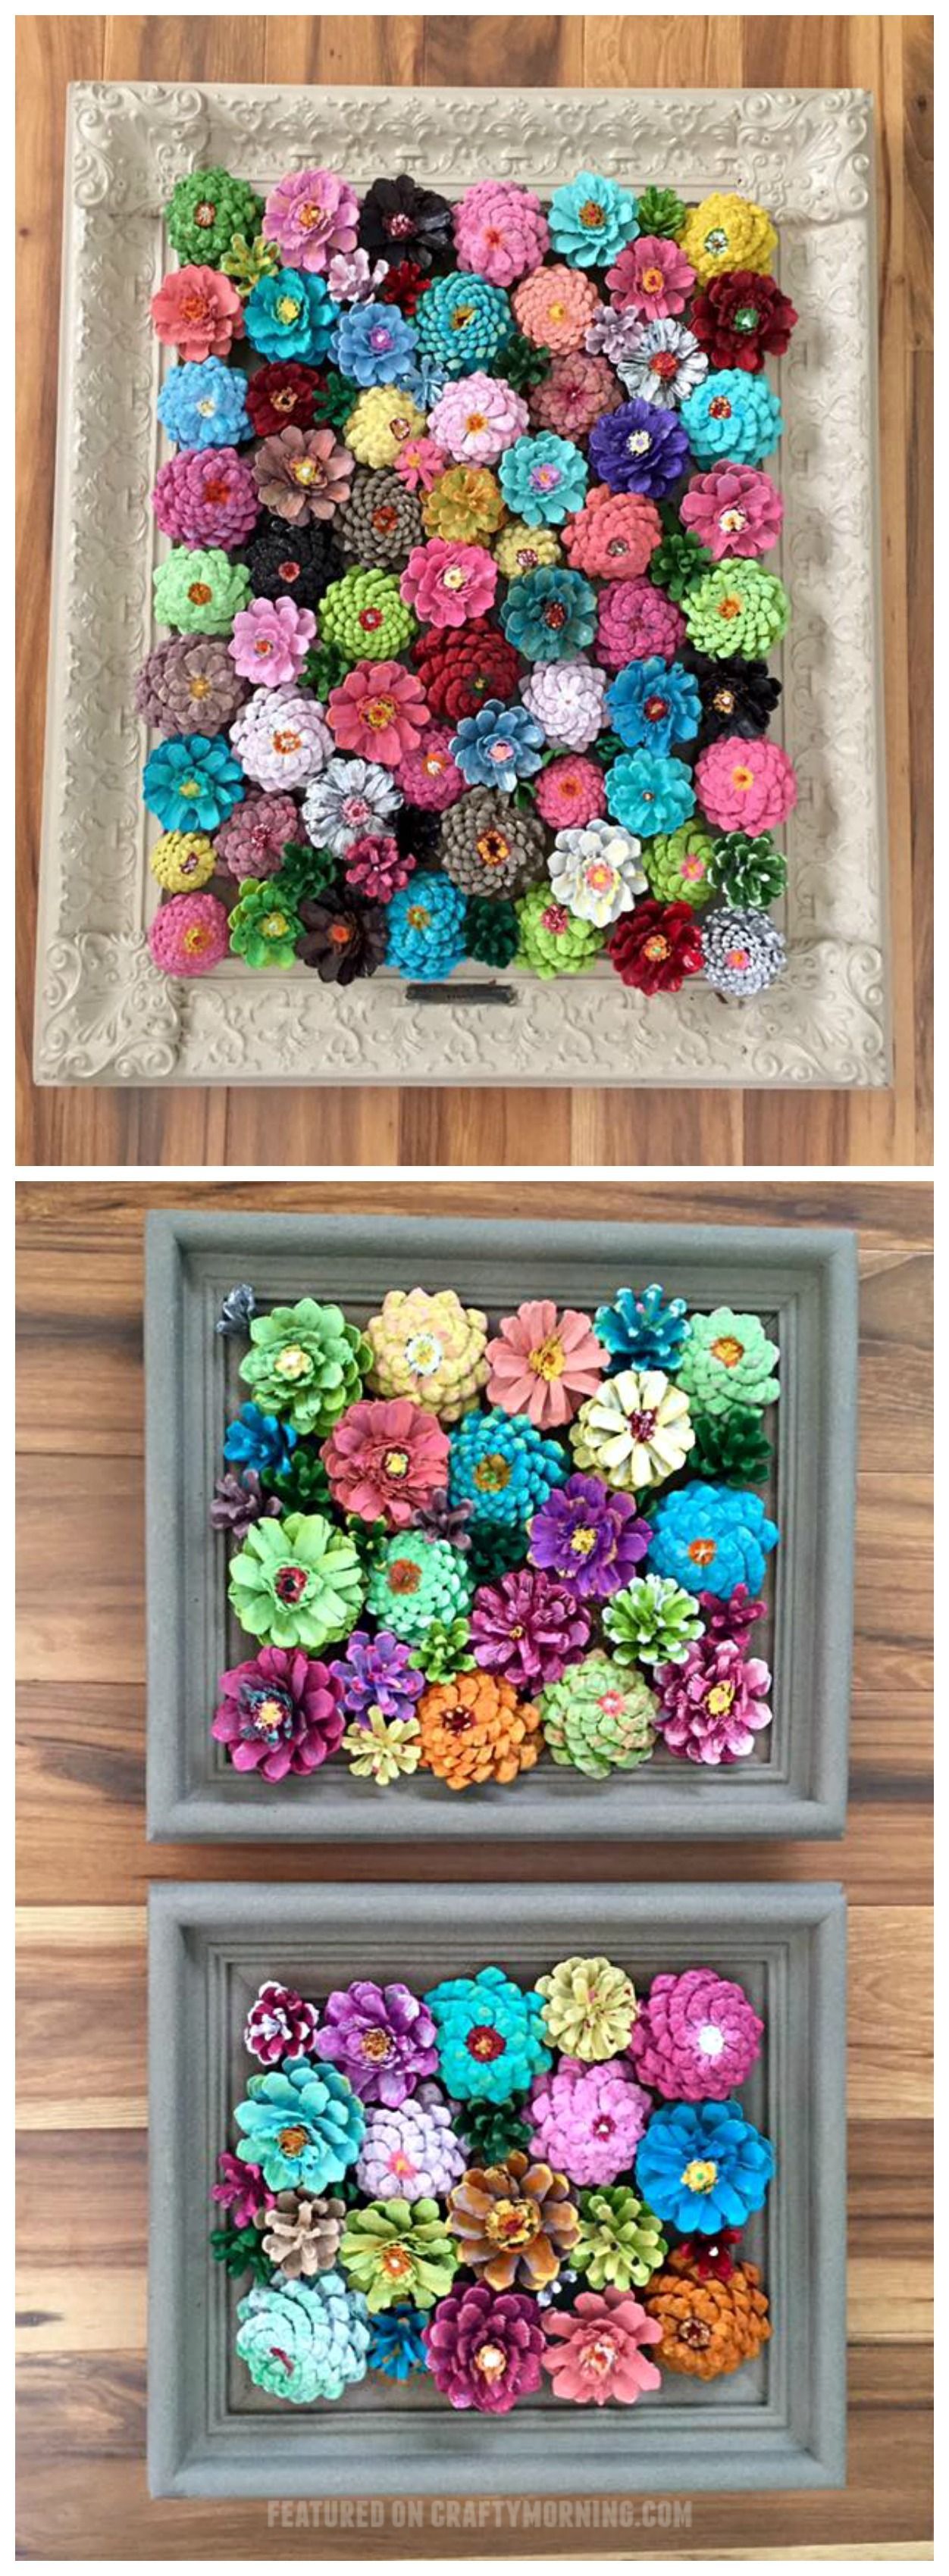 These pinecone flowers in a frame are so pretty! Perfect craft for summer or spring. Makes a beautiful wall art piece.